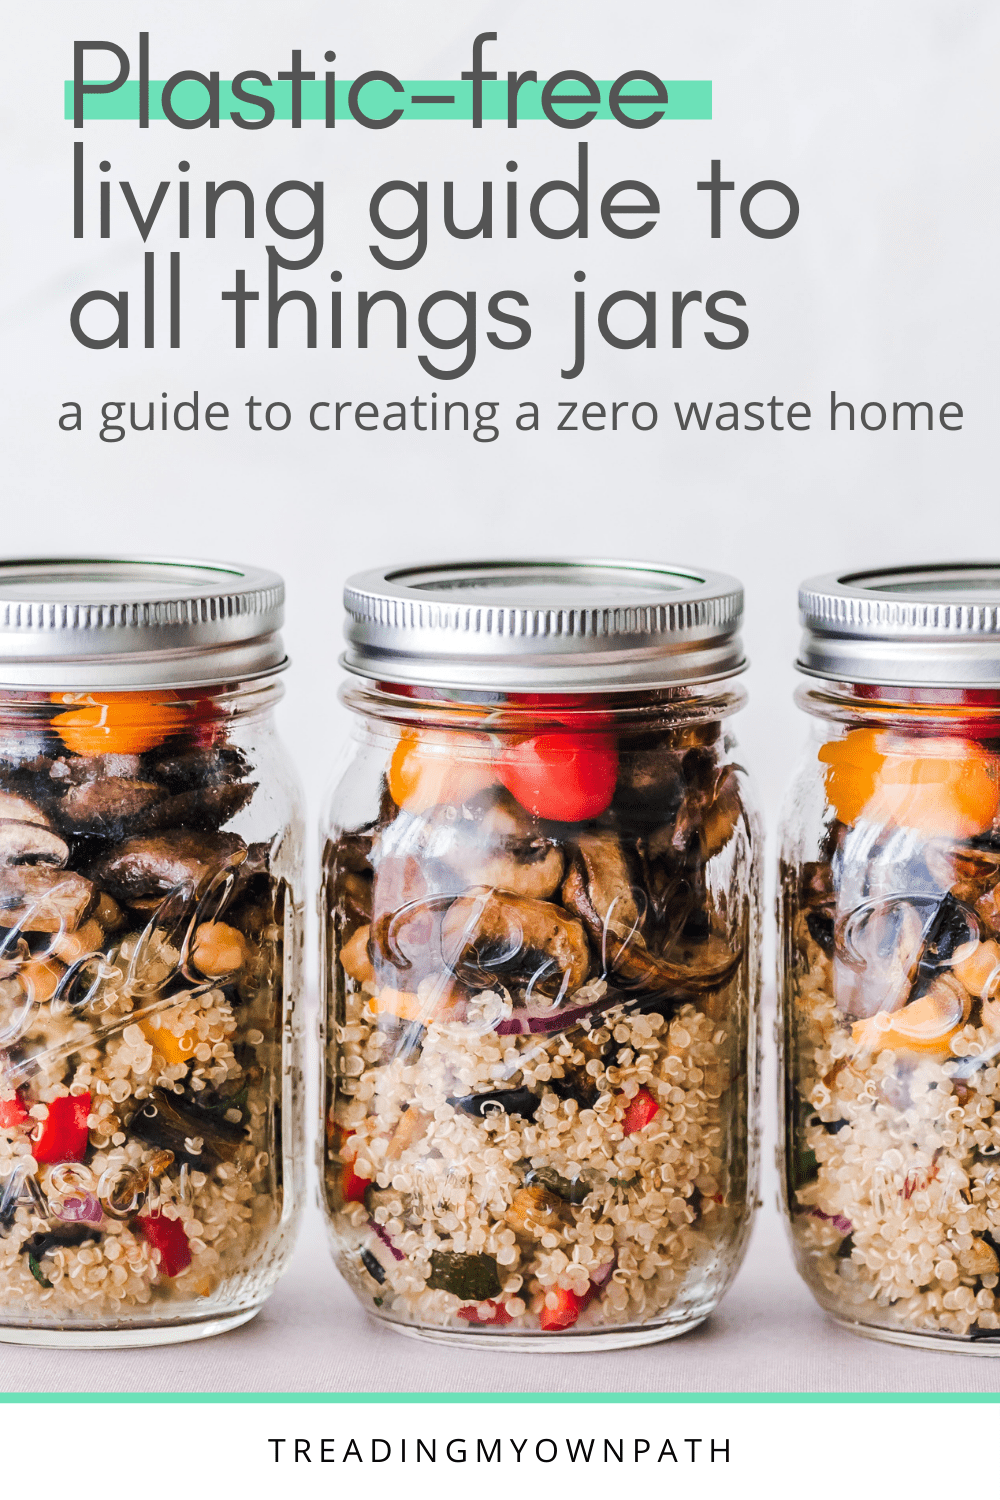 A Zero Waste, Plastic-Free Living Guide to All Things Jars